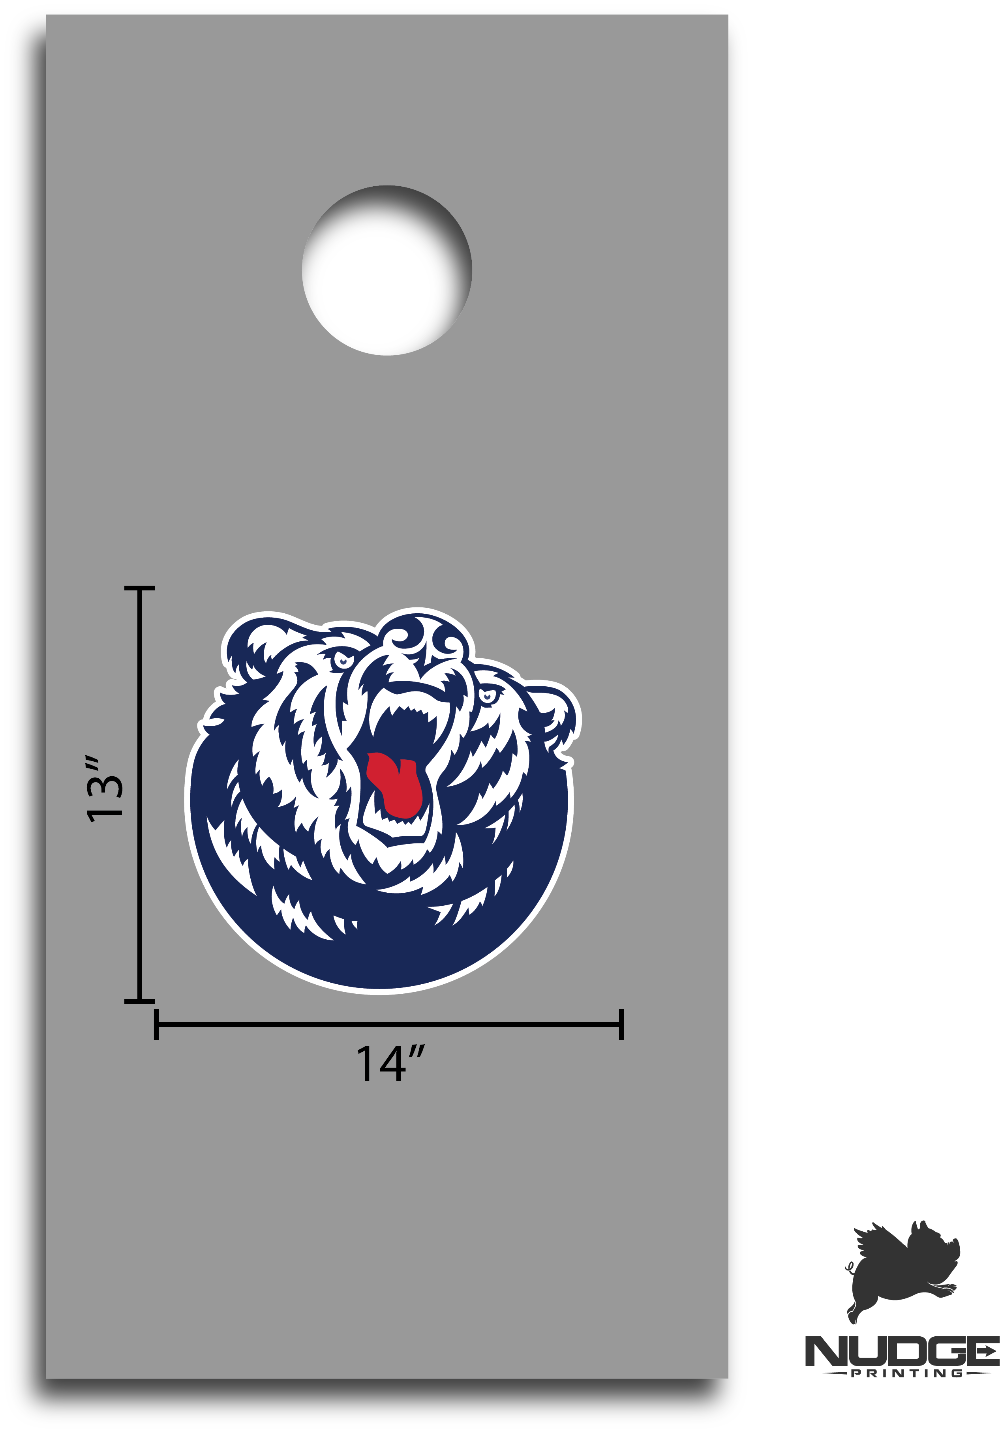 Belmont Bruins blue, red, and white bruiser bear head cornhole decal for corn hole board